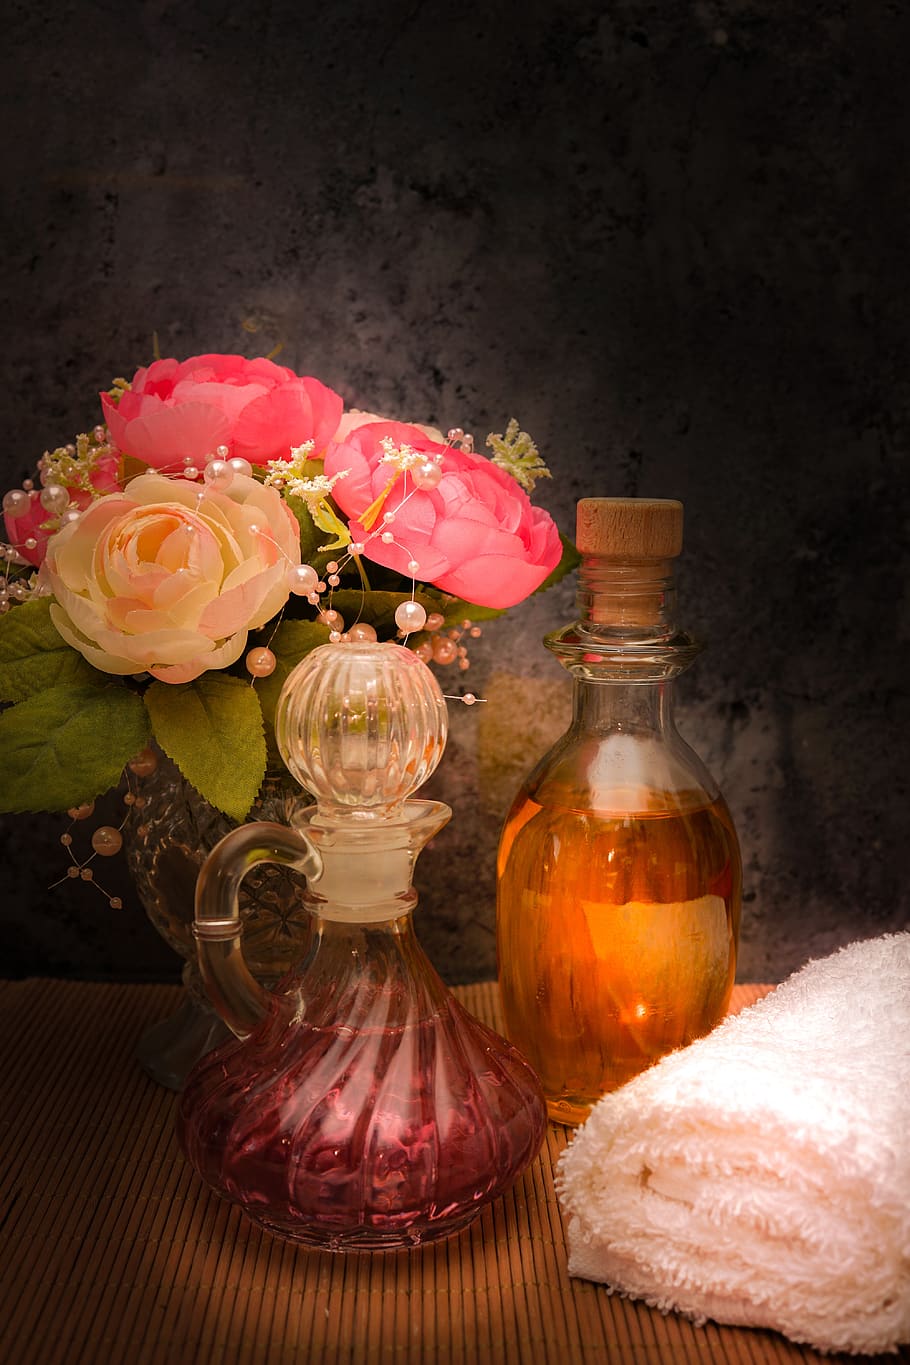 wellness, carafe, oil, massage, towel, white, flowers, still life, spa, relaxation